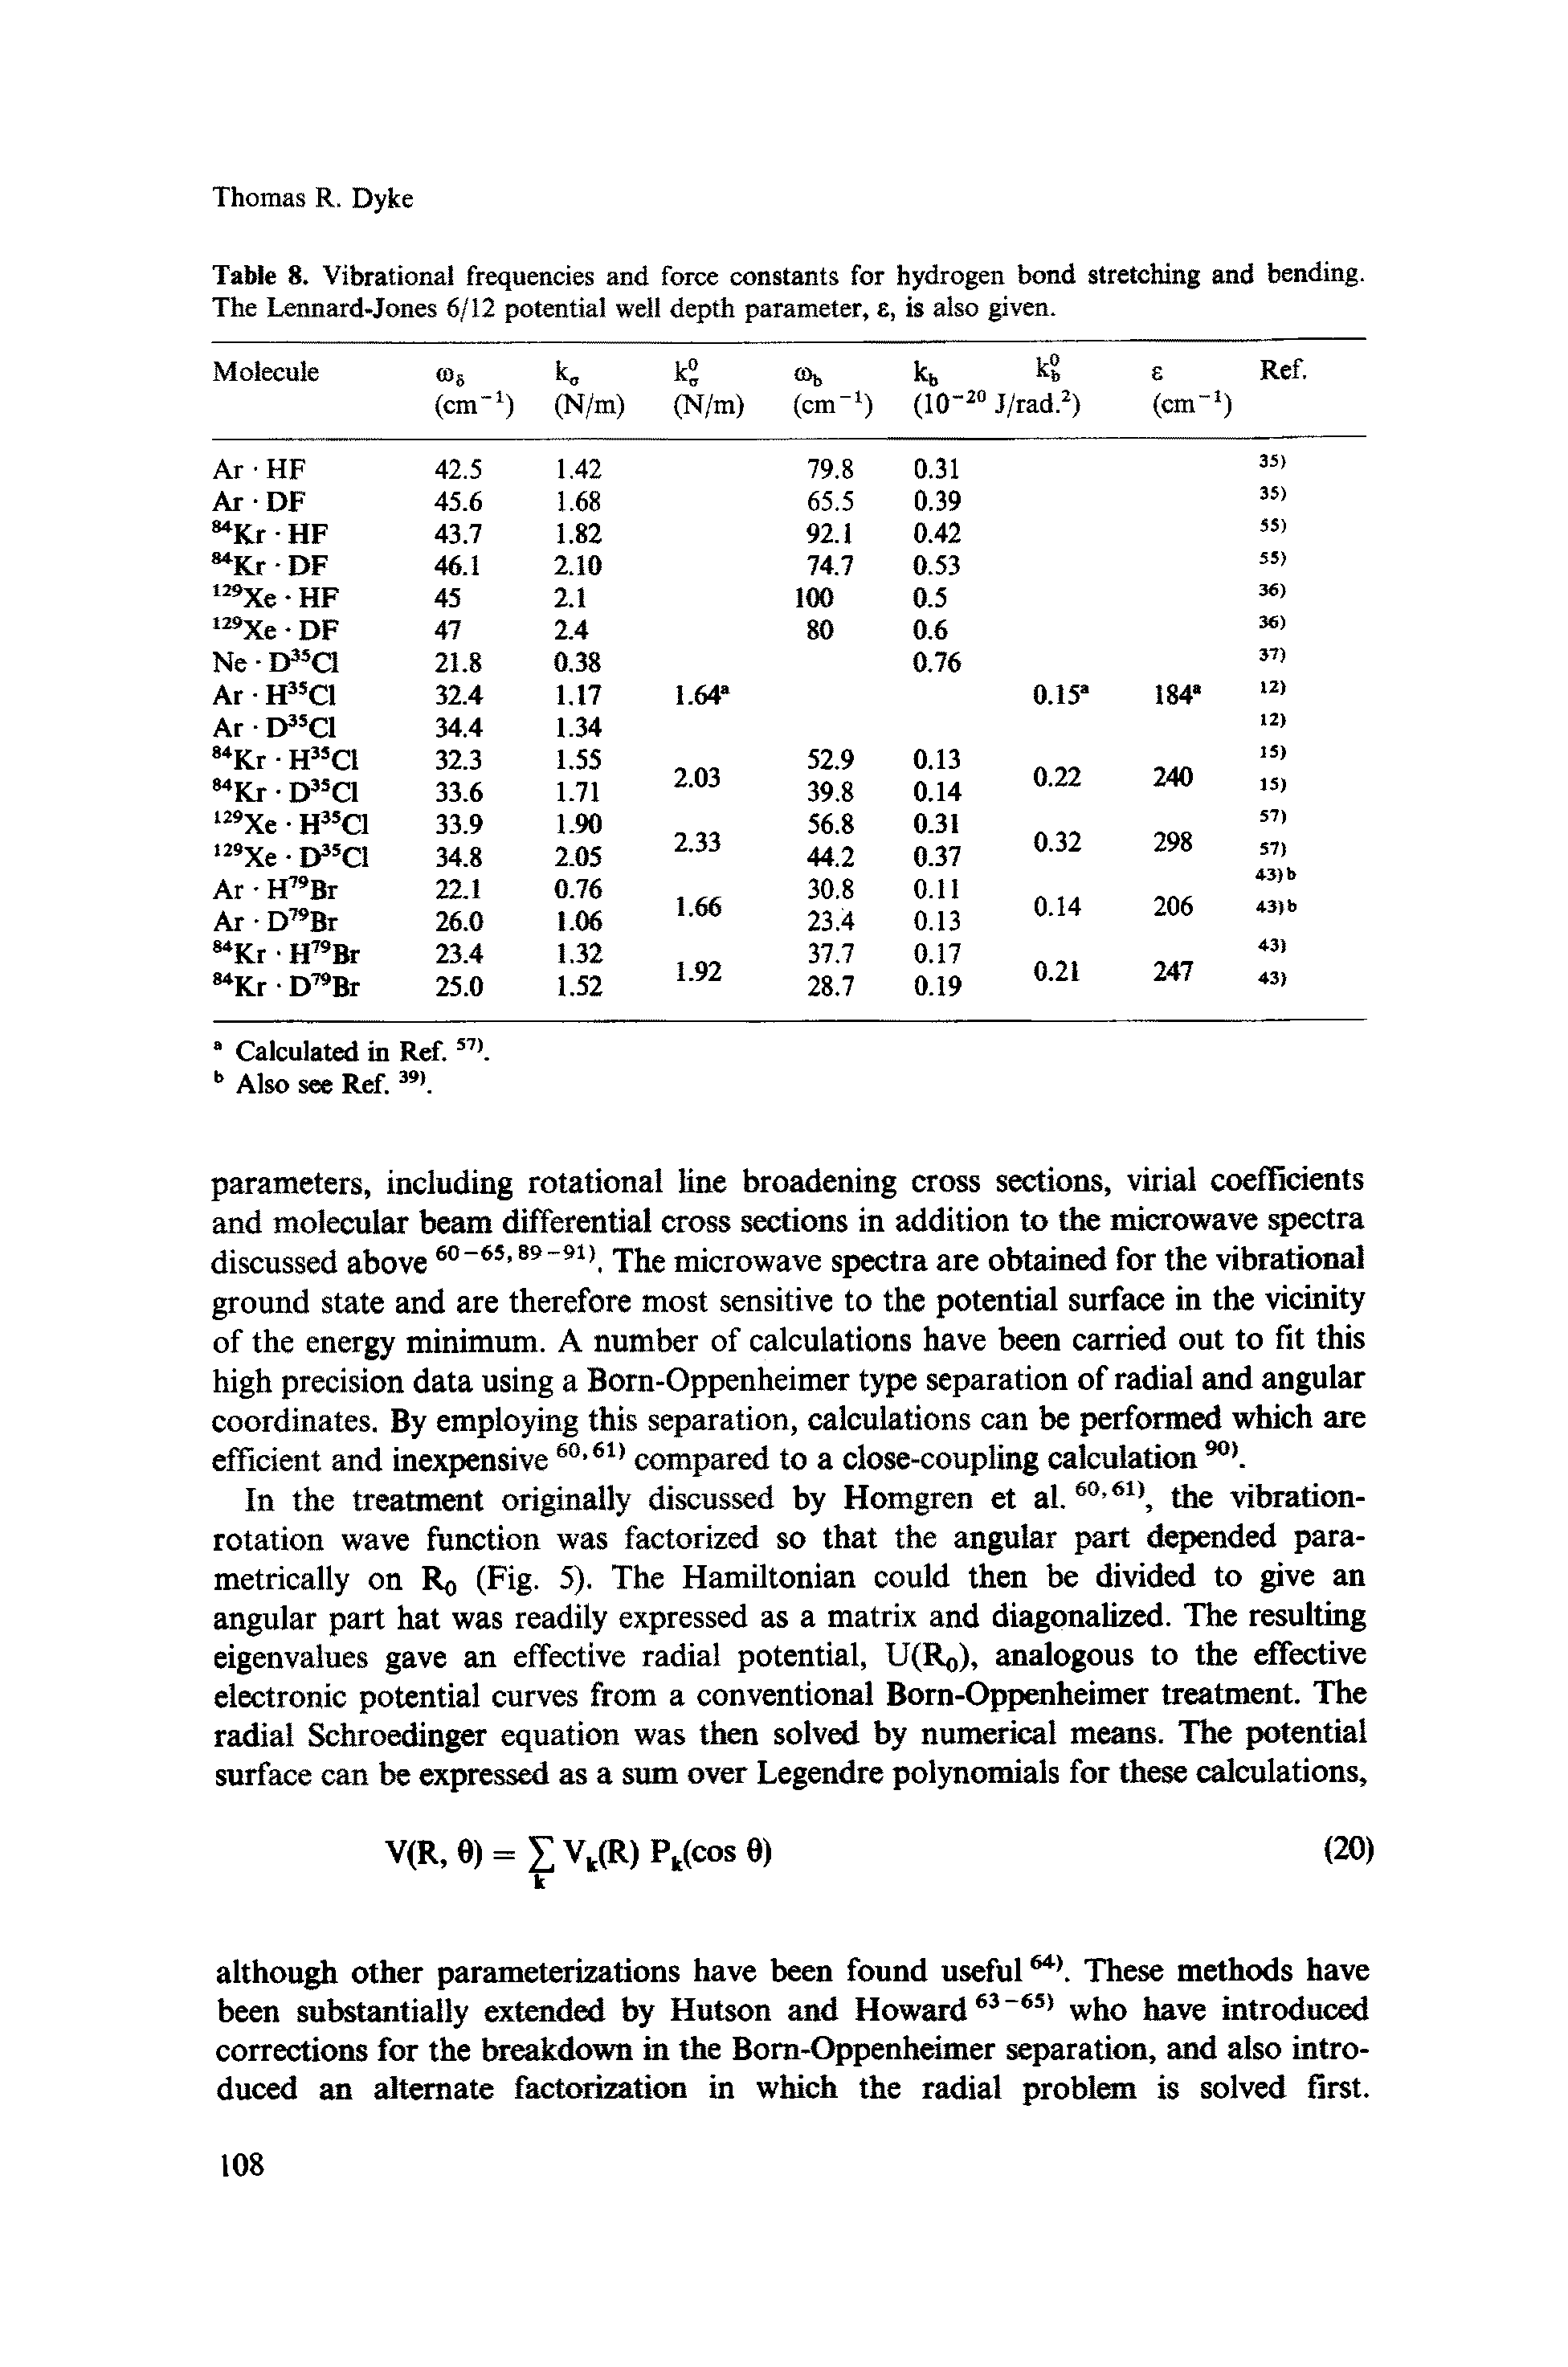 Table 8. Vibrational frequencies and force constants for hydrogen bond stretching and bending. The Lennard-Jones 6/12 potential well depth parameter, E, is also given.